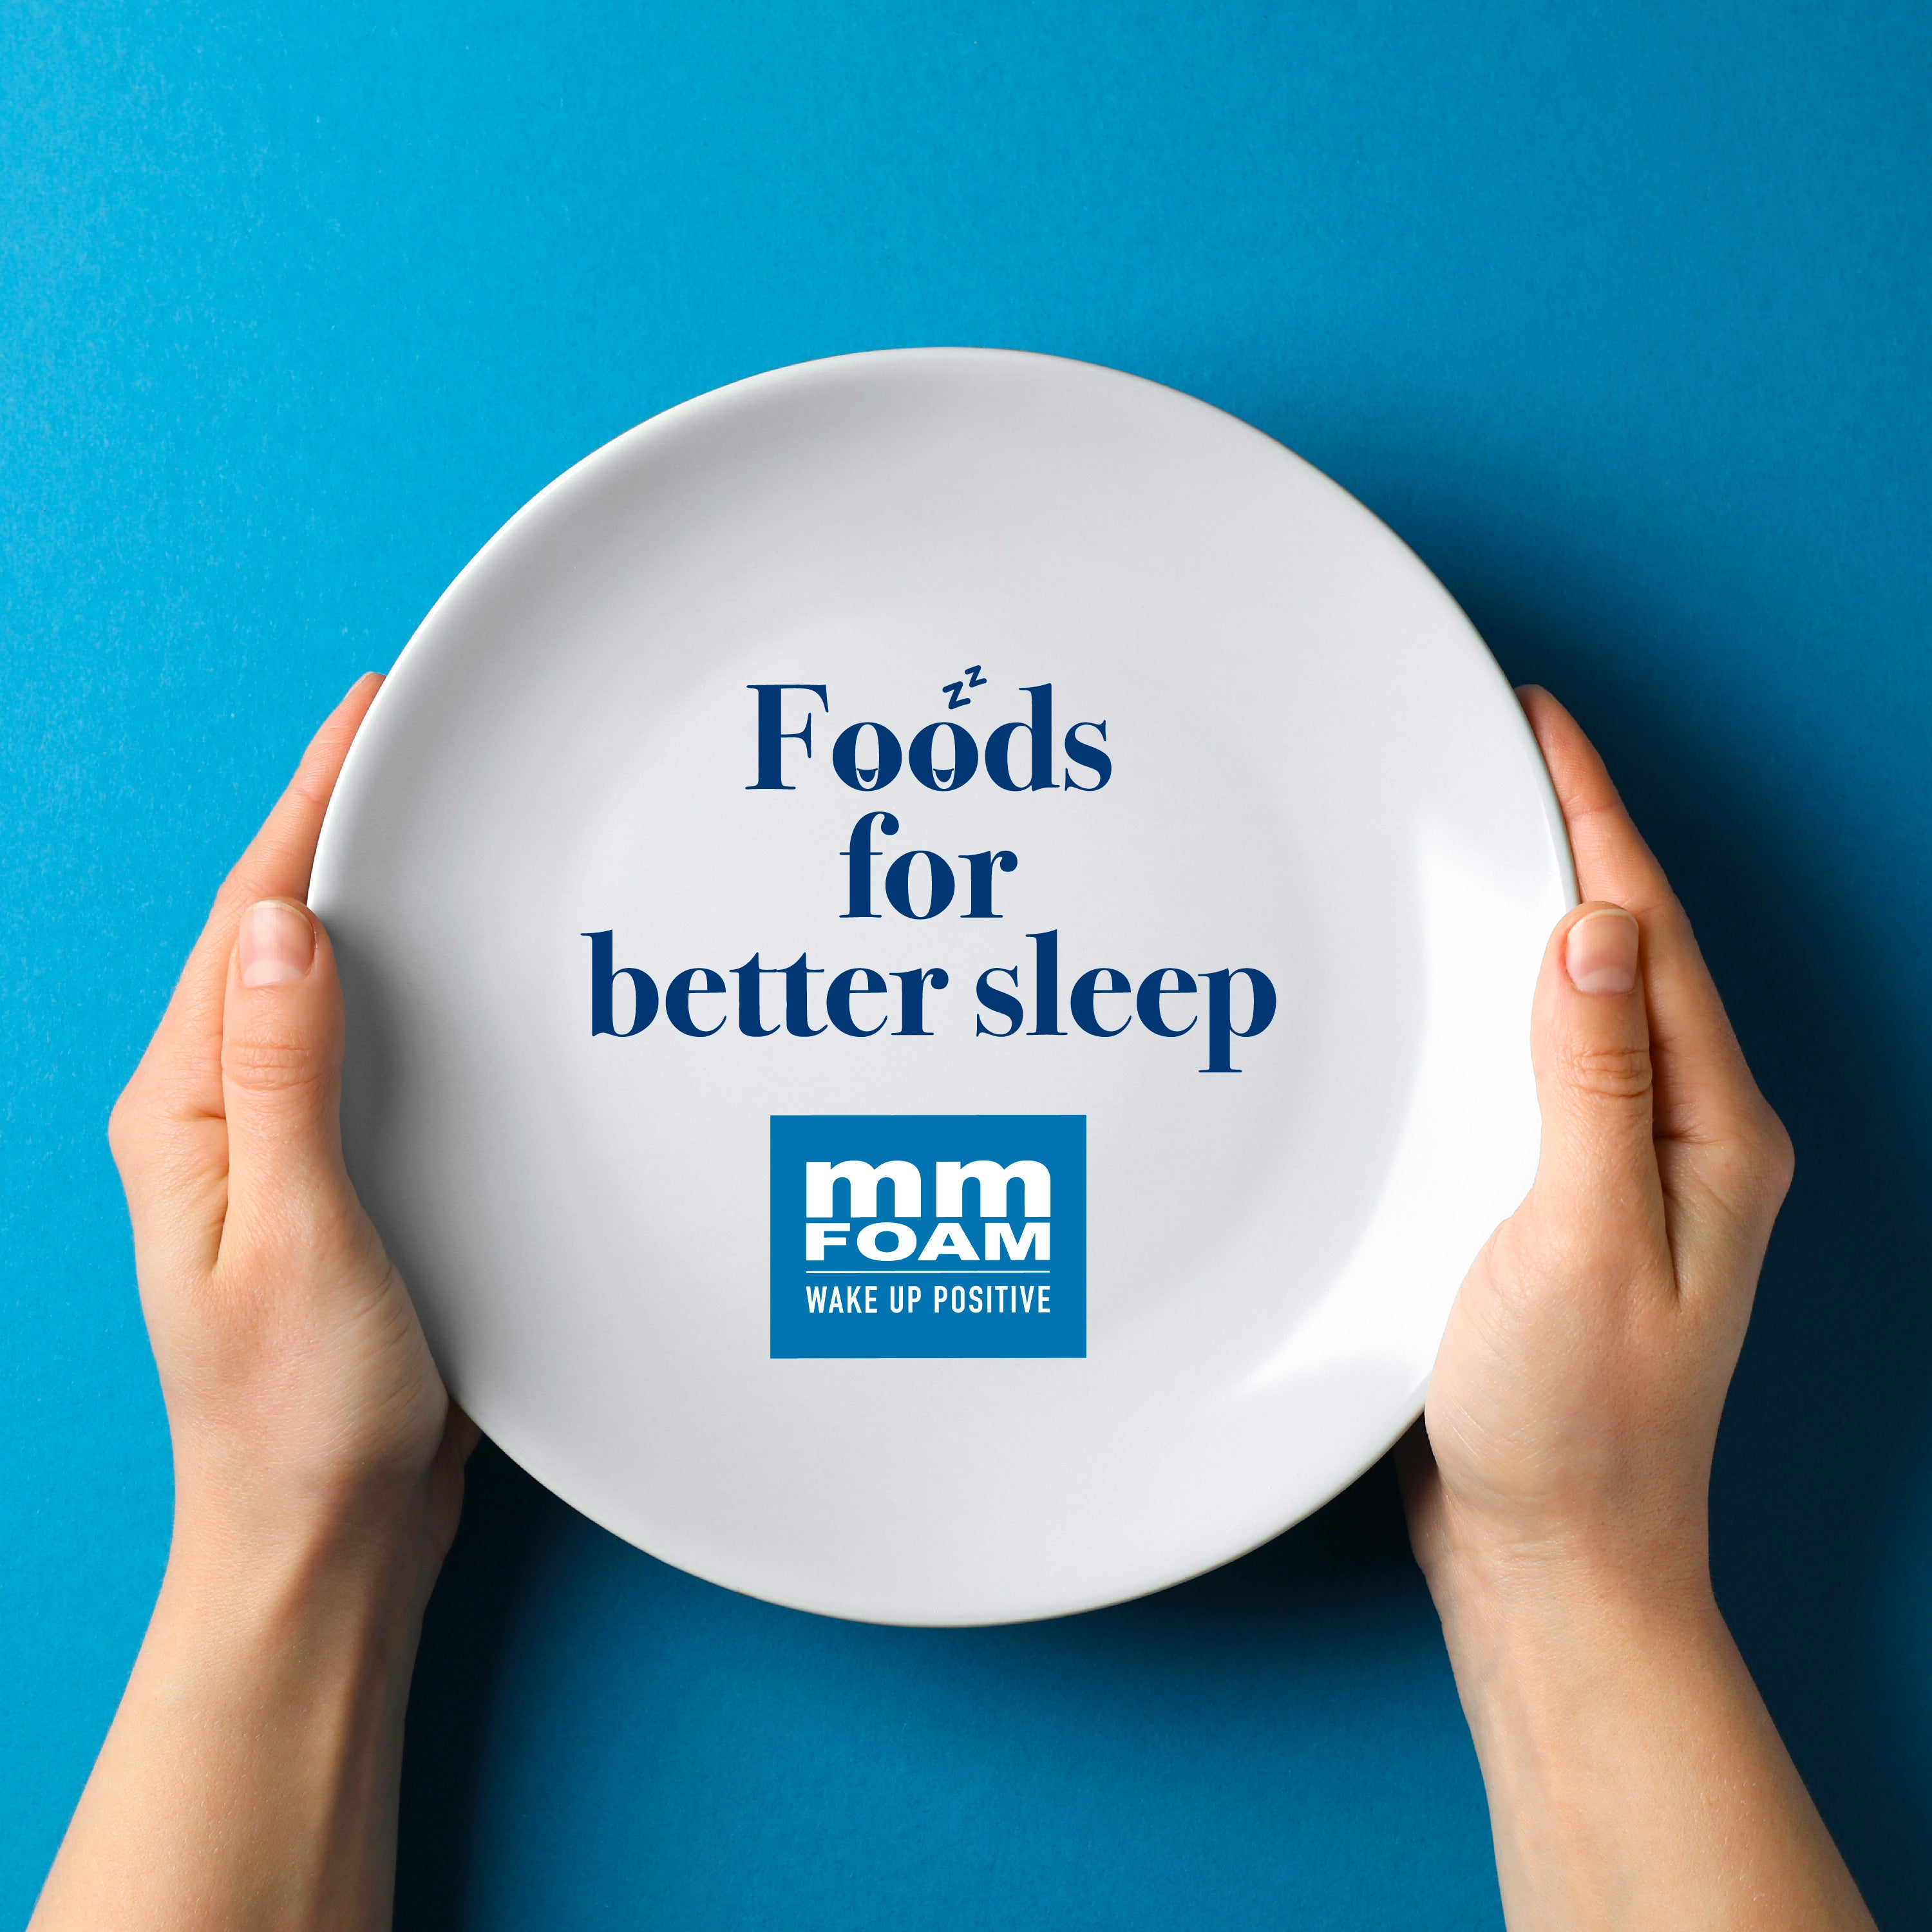 Sleep Soundly with These 6 Foods: A Guide to Better Sleep